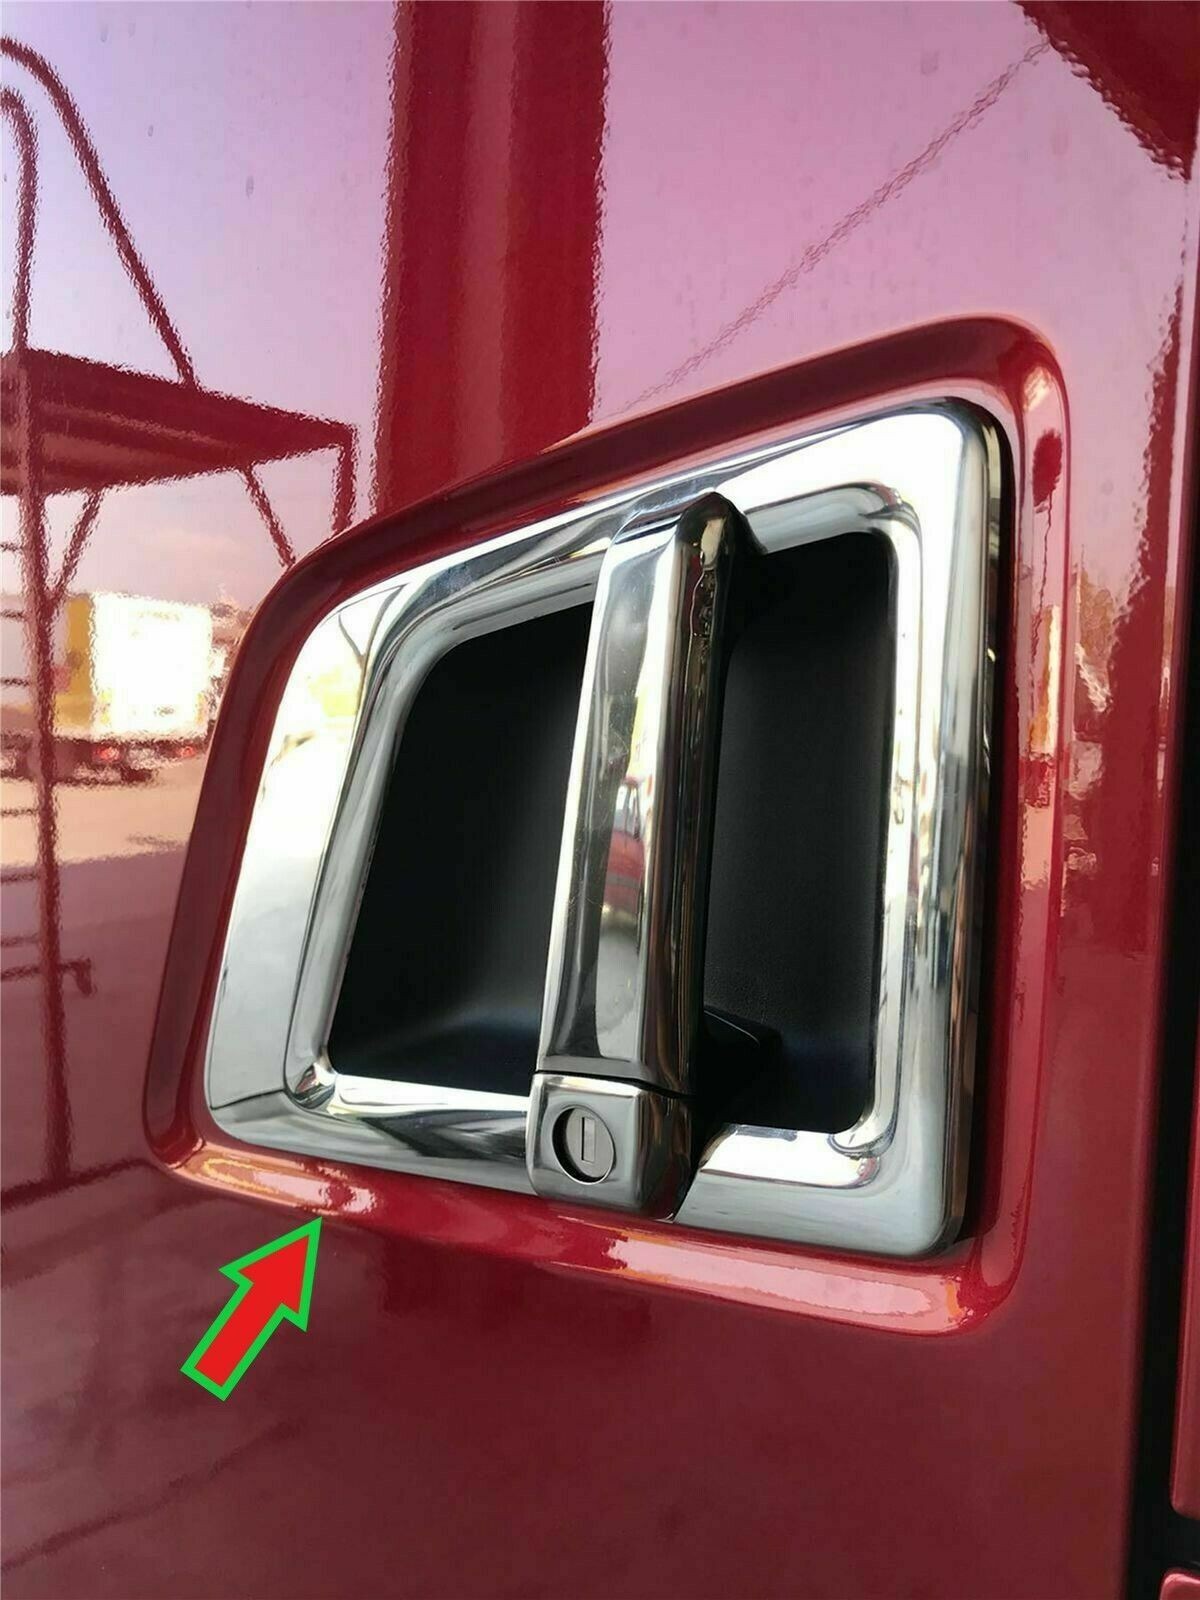 Scania S500&R450 2017 Up Chrome Door Handle Cover Polished Stainless Steel 4 Pcs